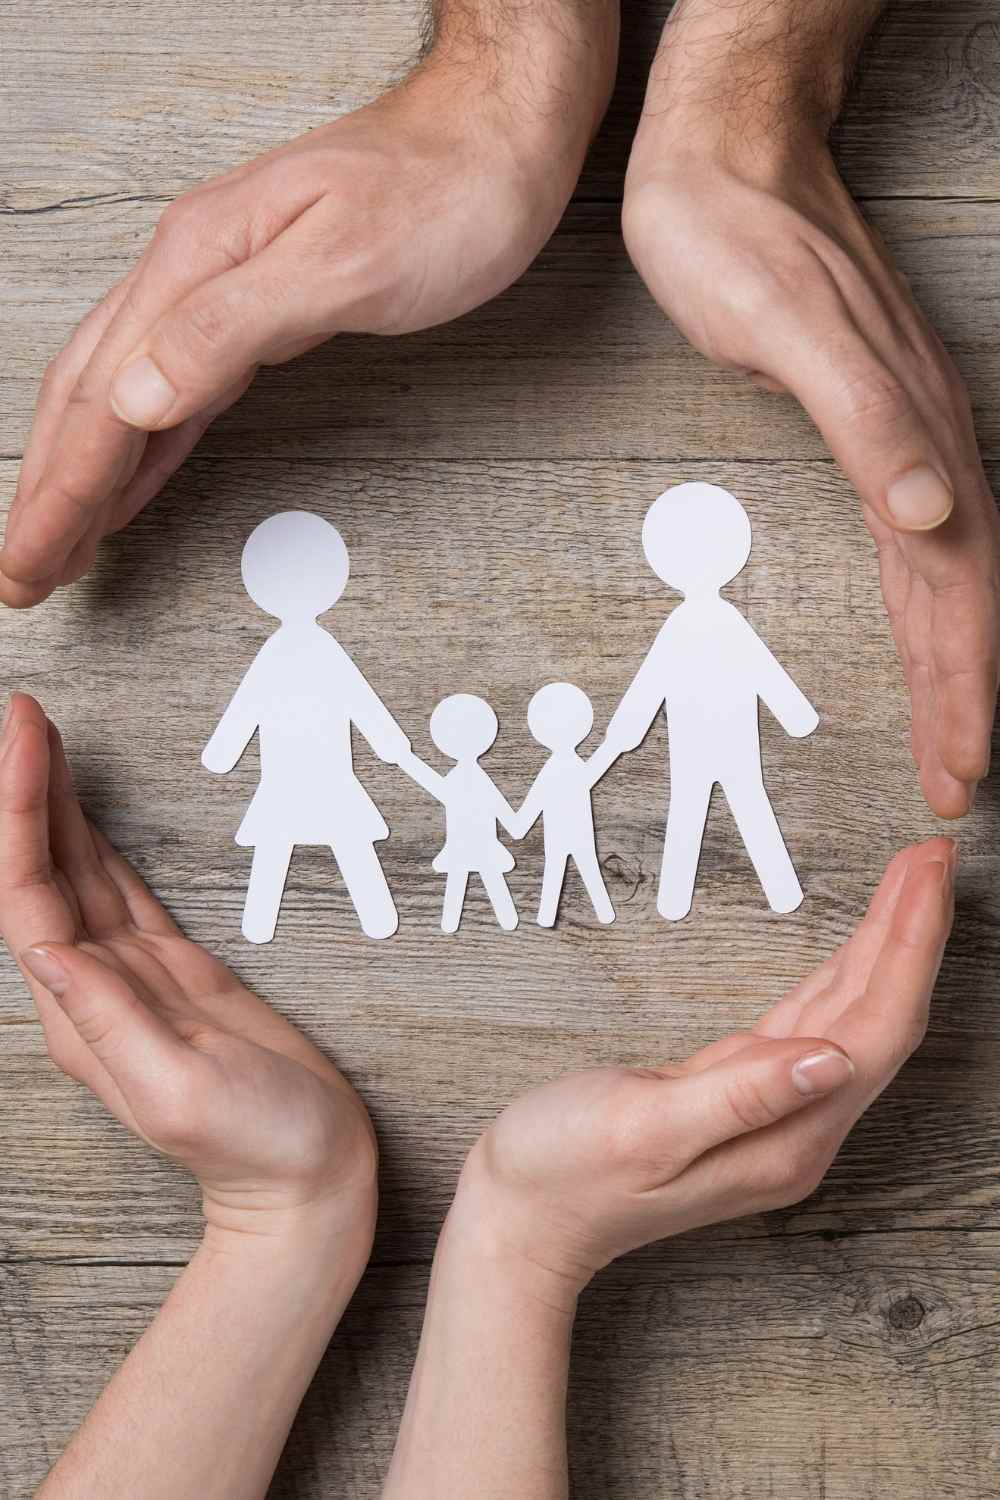 hands around paper cut outs of a family to show care